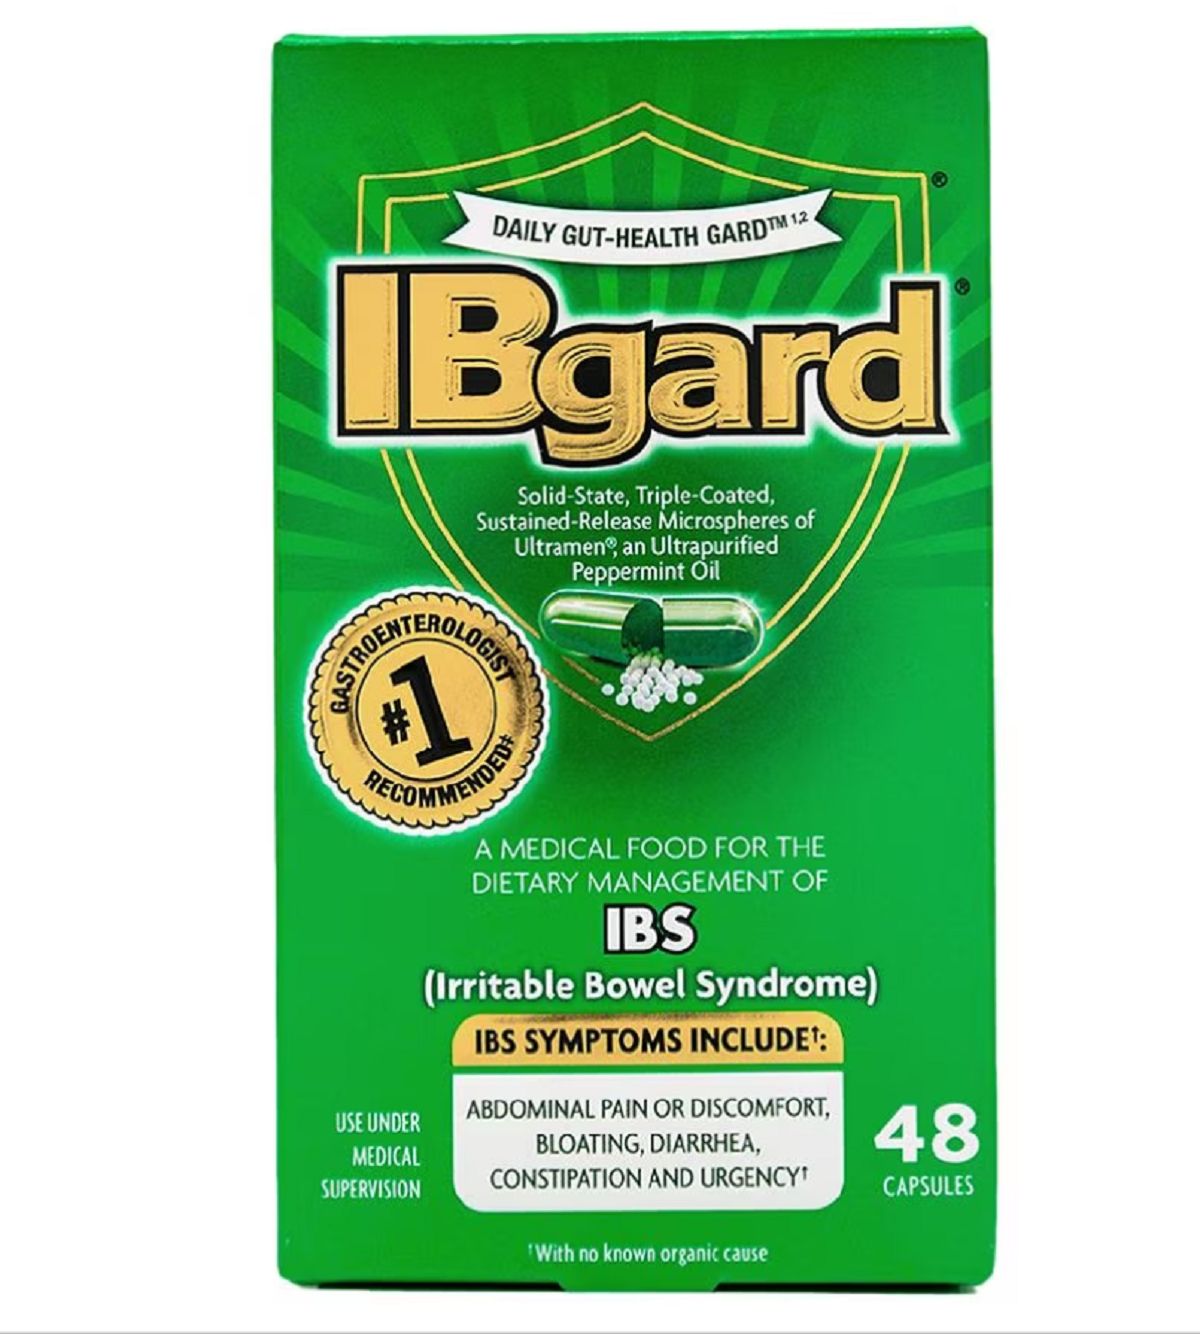 $4.00 Off IBgard or FDgard Product Coupon